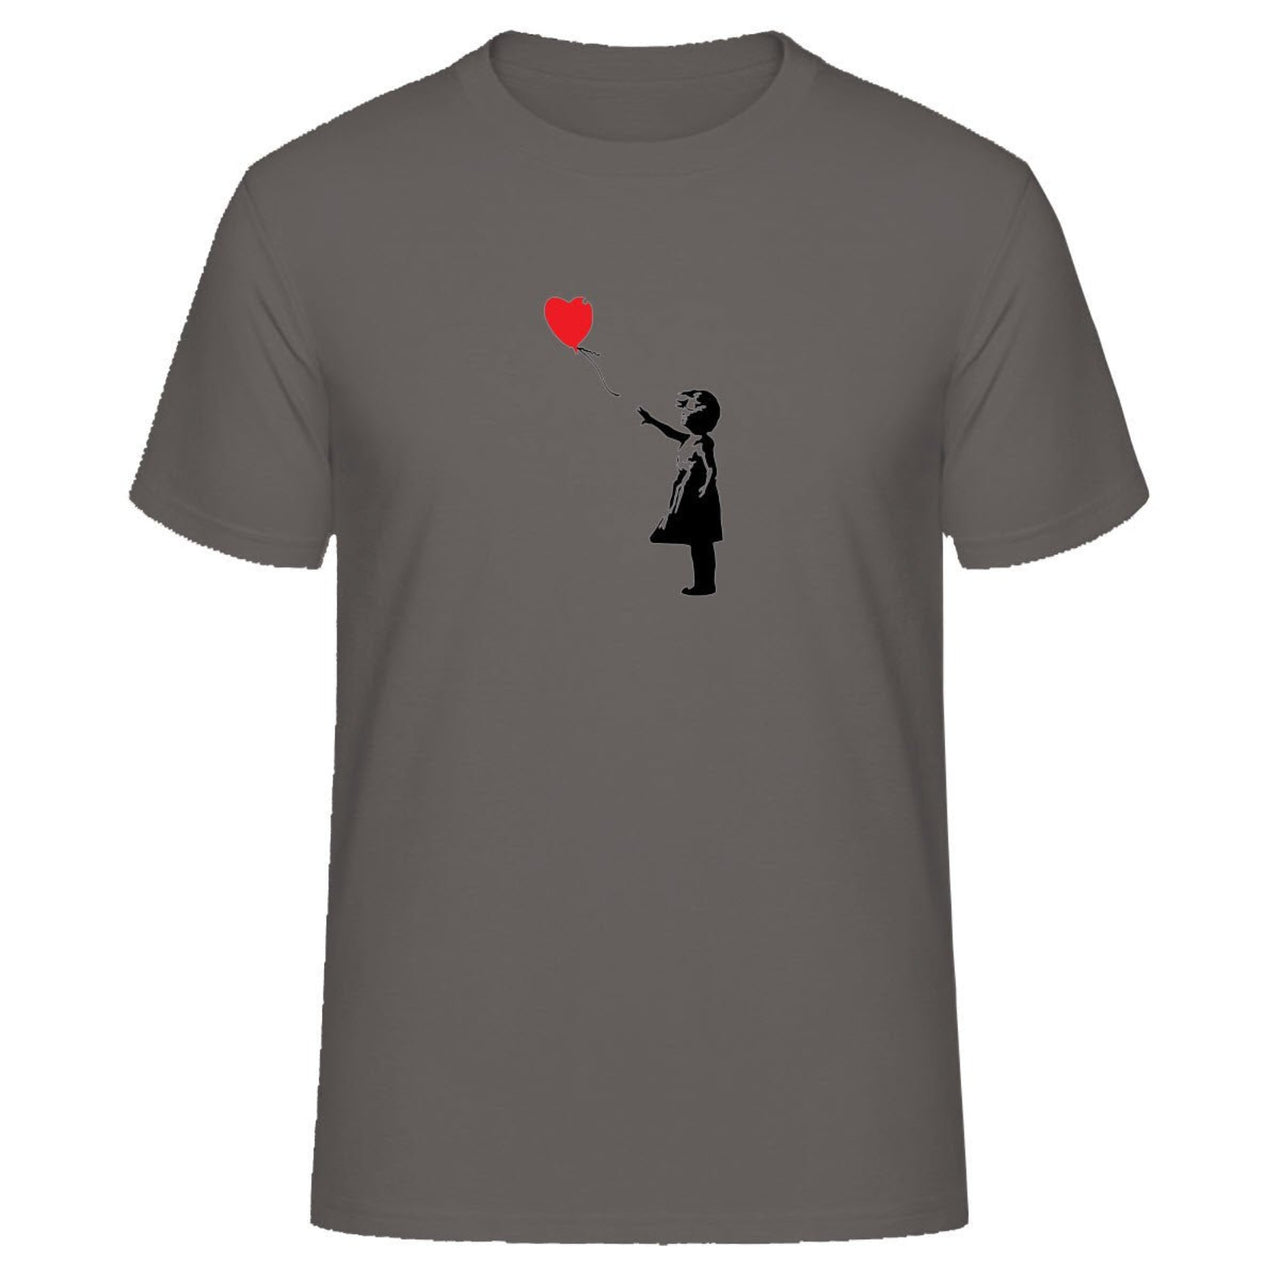 Banksy The Girl with a Red Balloon Artwork T-Shirt - Clothing - Harvey Ltd